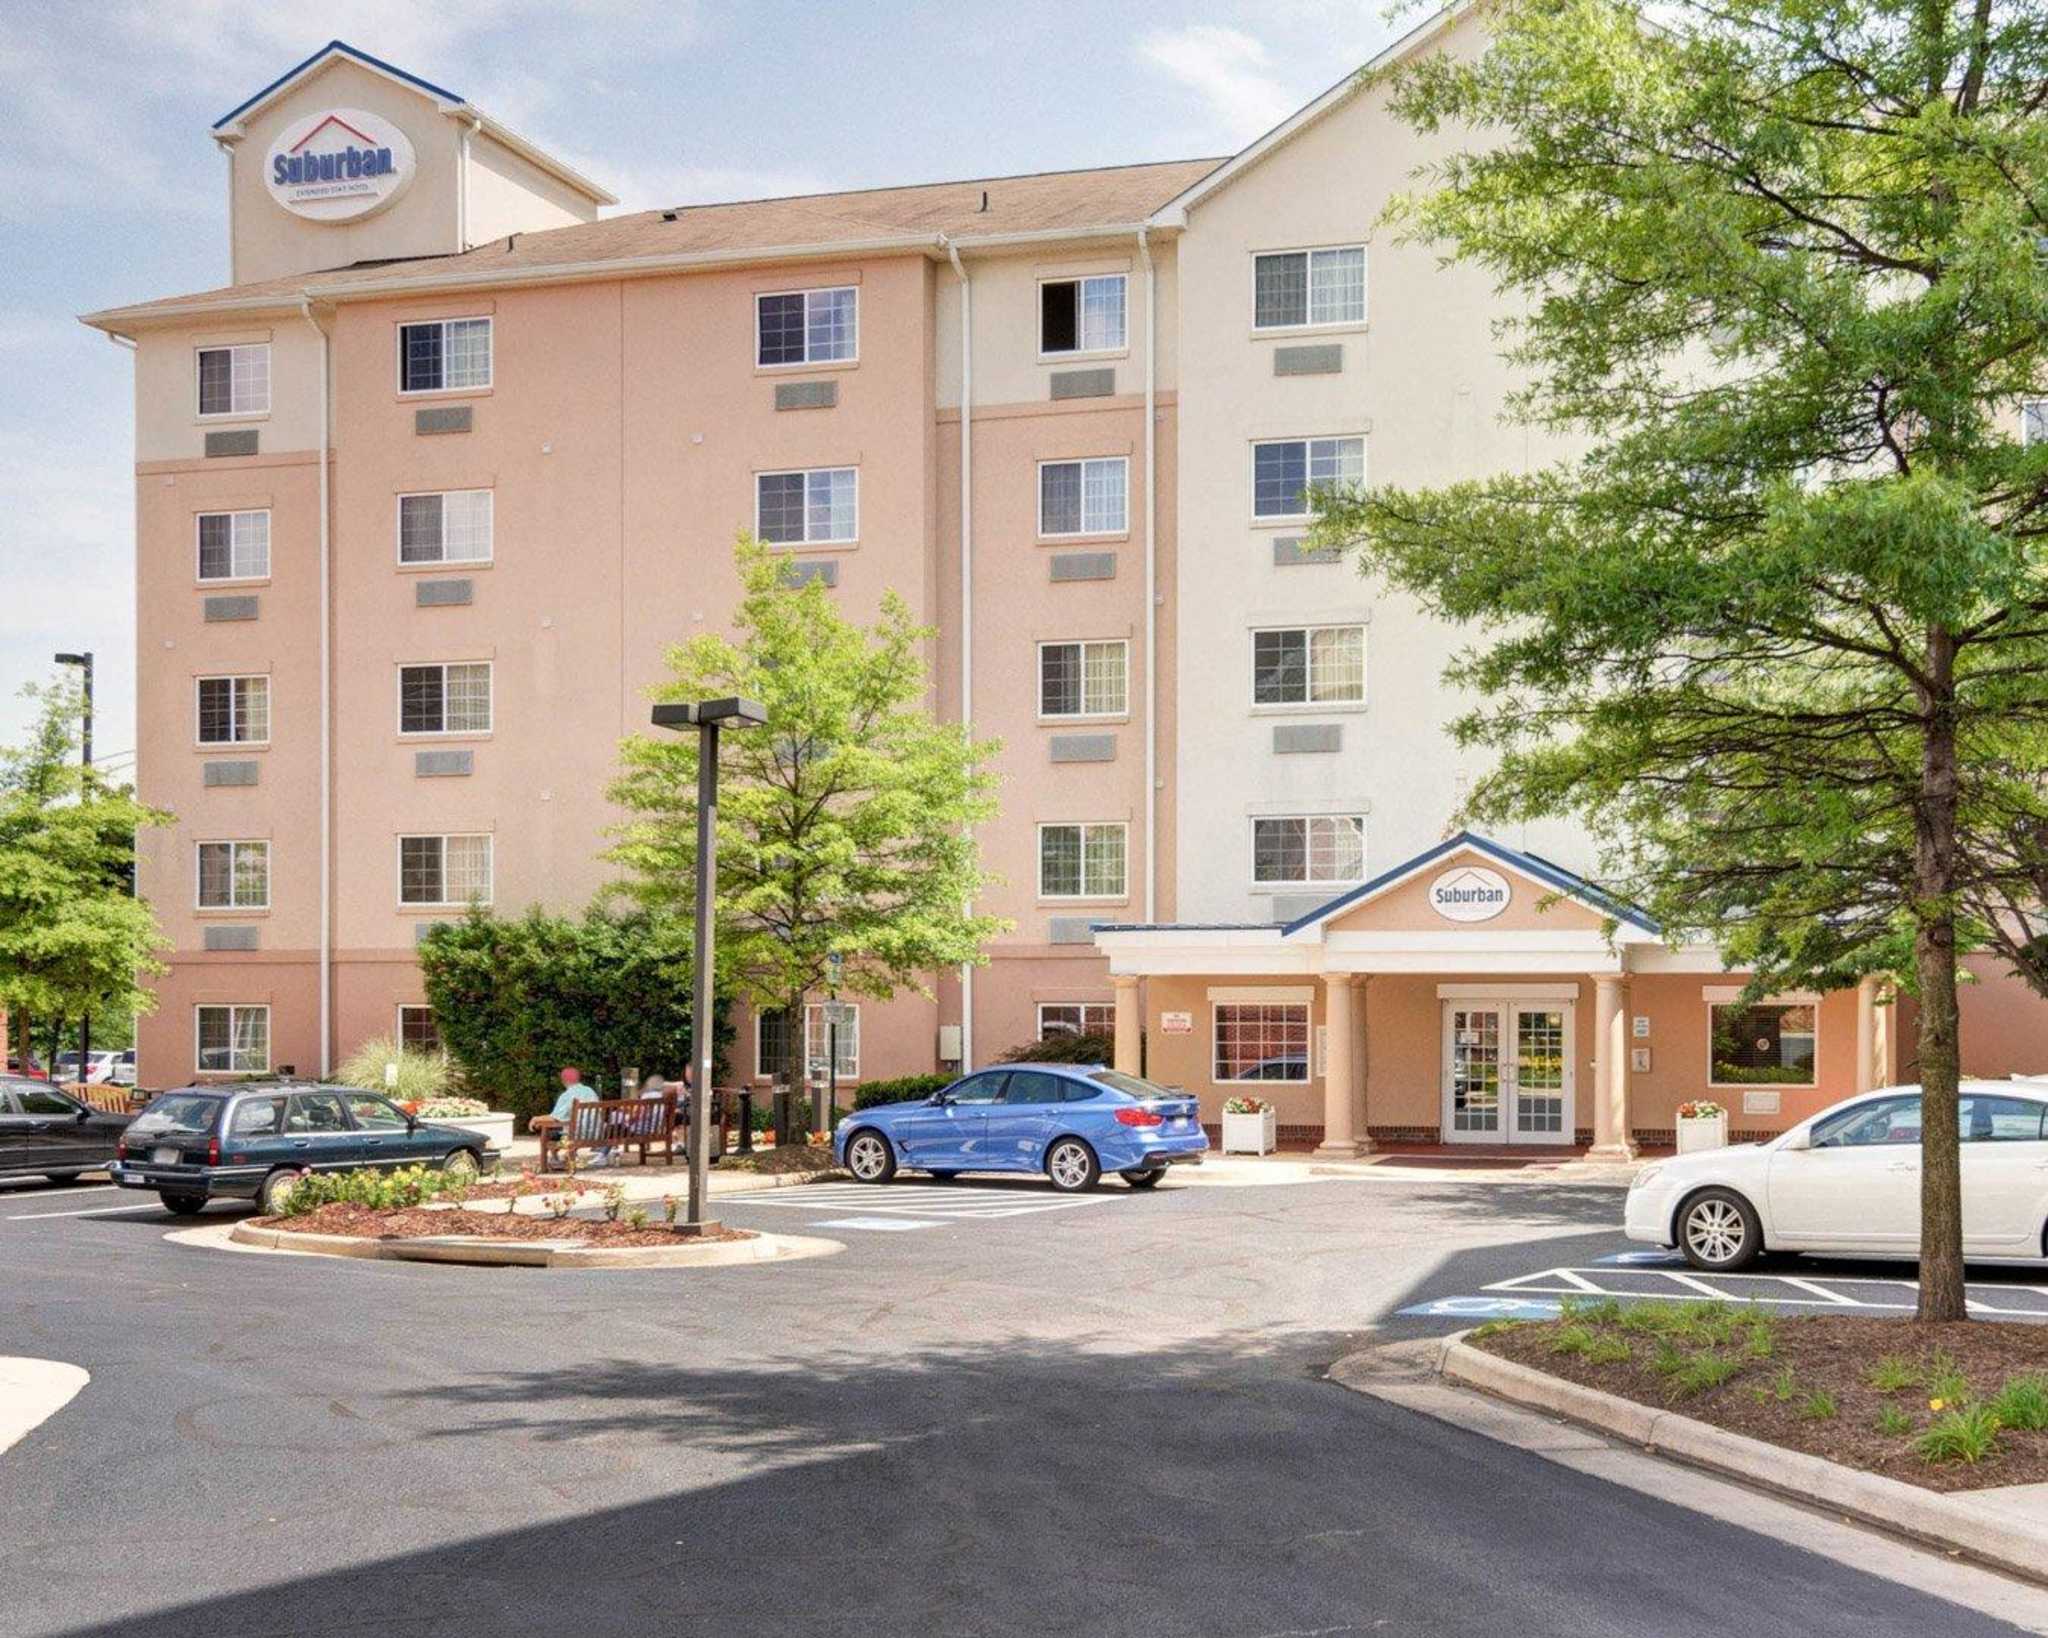 Discount [75% Off] Suburban Extended Stay Hotel Near Fort ...